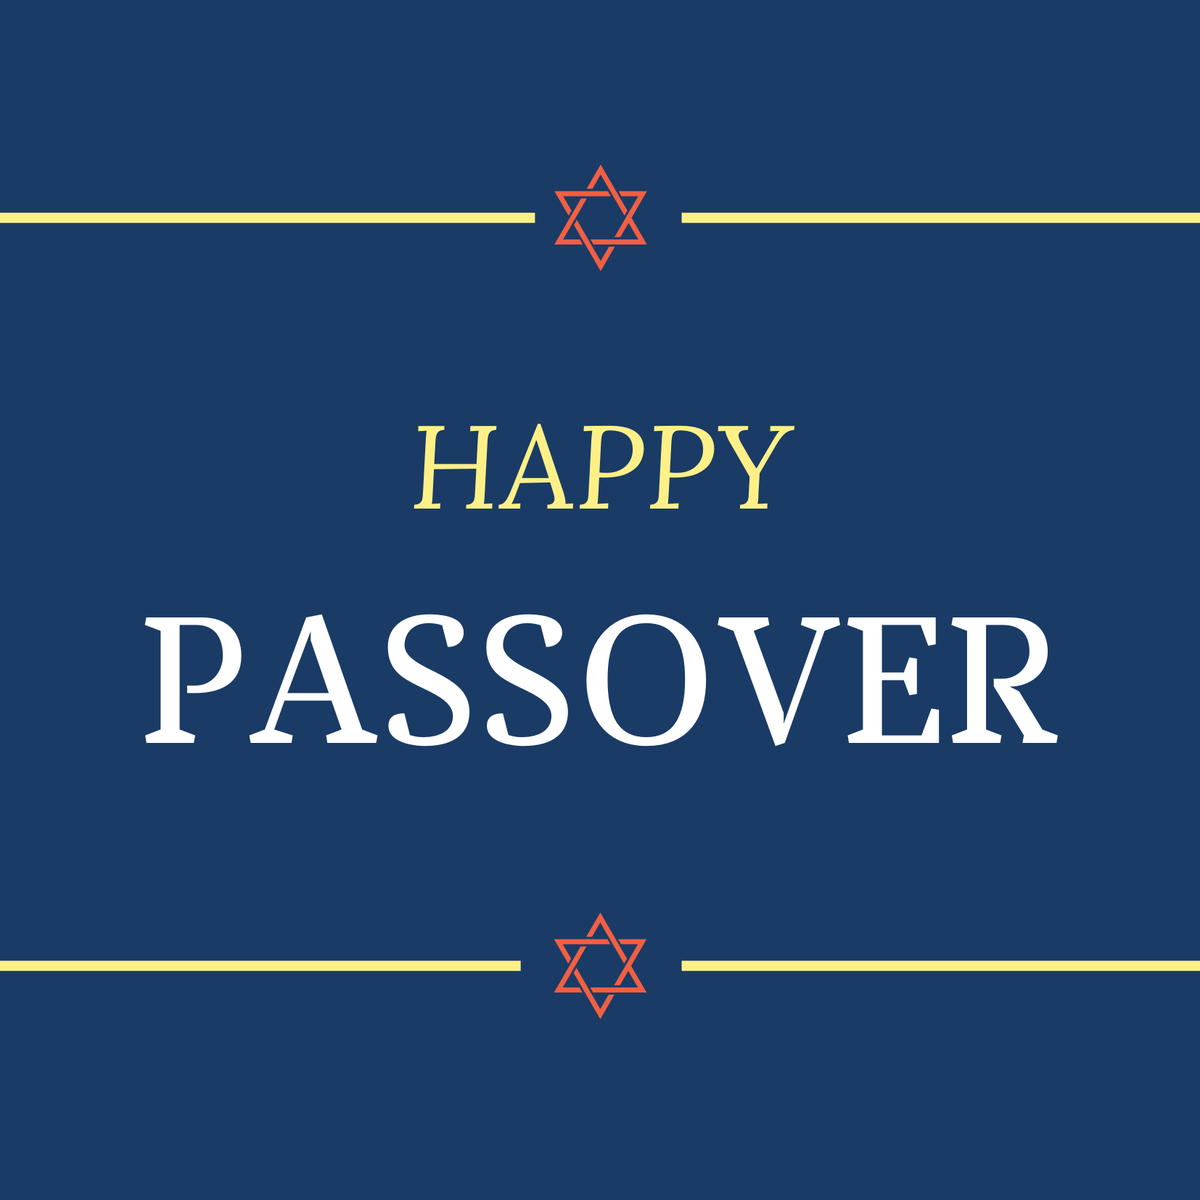 From all of us @cobbgalleria, we wish you a happy Passover.
#HappyPassover